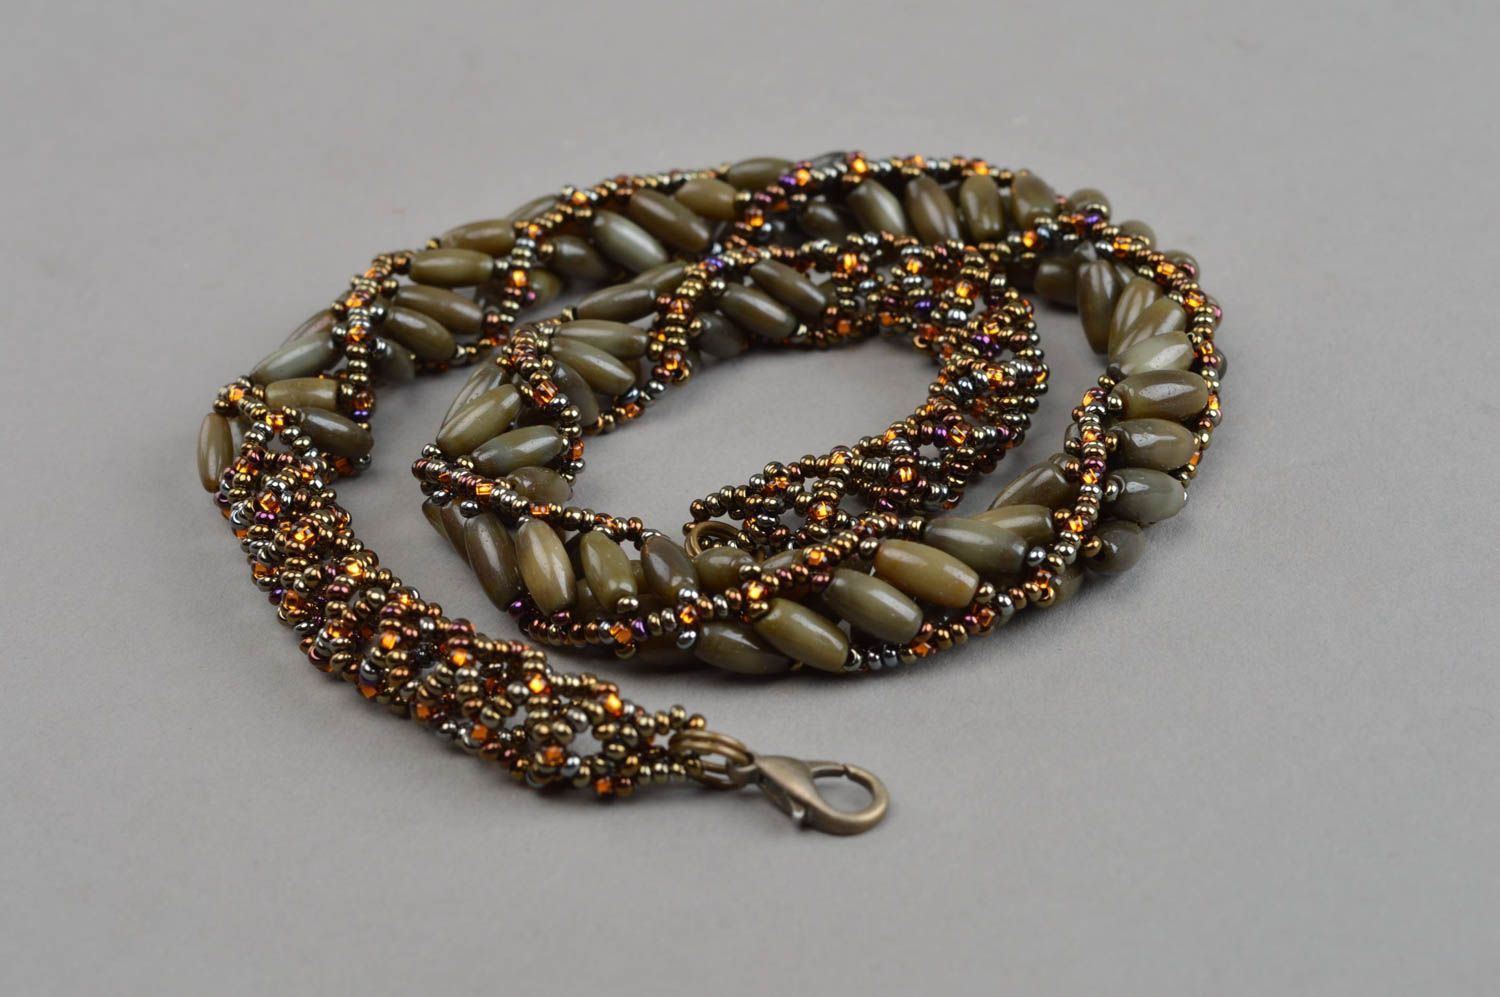 Handmade female necklace made of beads and natural stone stylish accessory photo 3